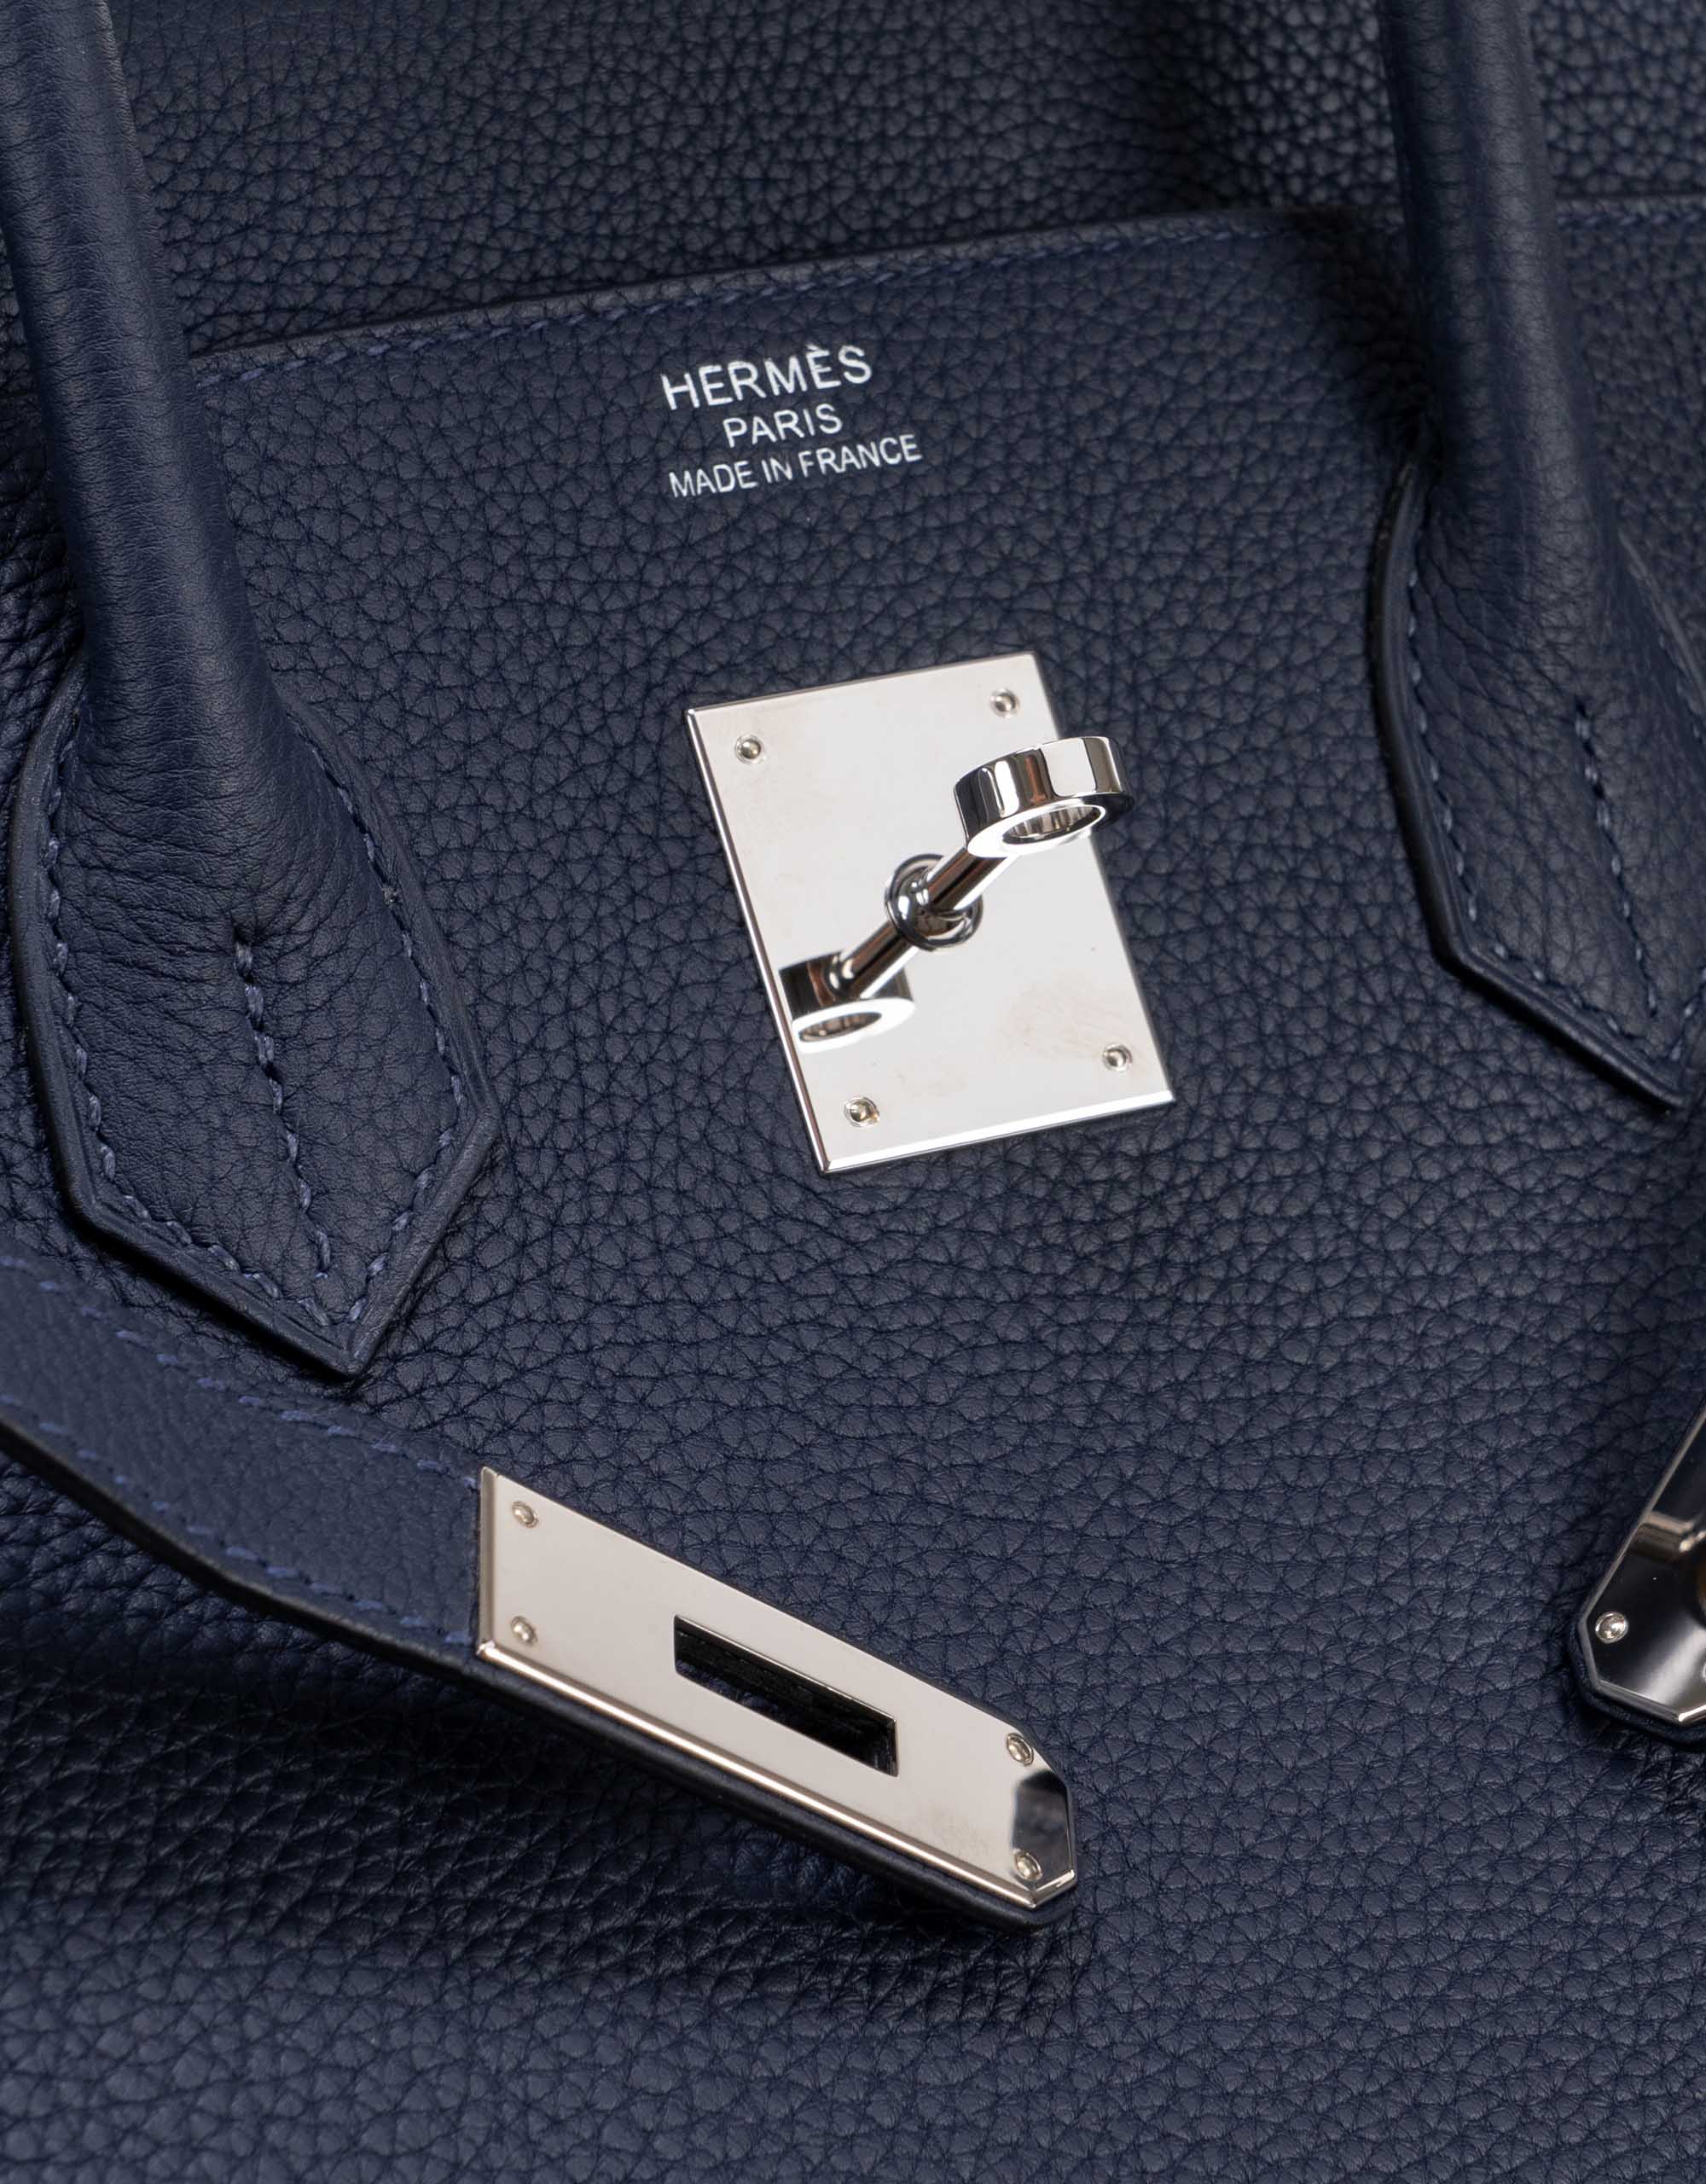 Hermès Bleu Nuit Birkin 35cm of Togo Leather with Gold Hardware, Handbags  and Accessories Online, Ecommerce Retail